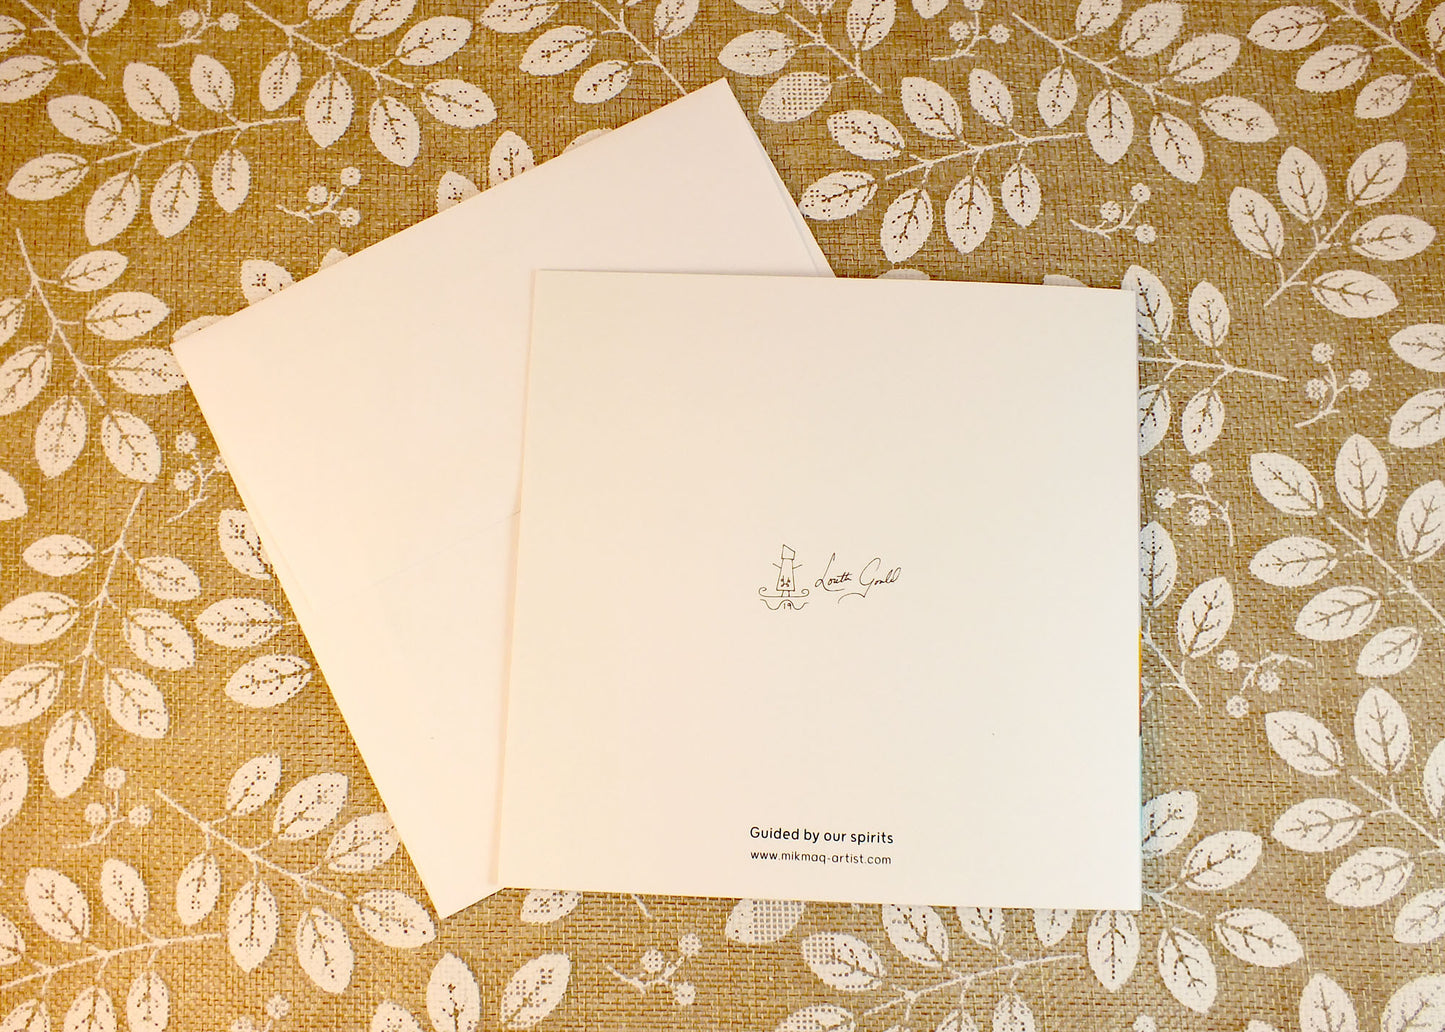 Blank Folding Greeting Cards & Envelopes Materials: standard card stock, print of original paintings All occasion gorgeous blank cards and envelopes Artwork done by Loretta Gould  Mi'kmaq Artist from Nova Scotia (Waycobah First Nation)